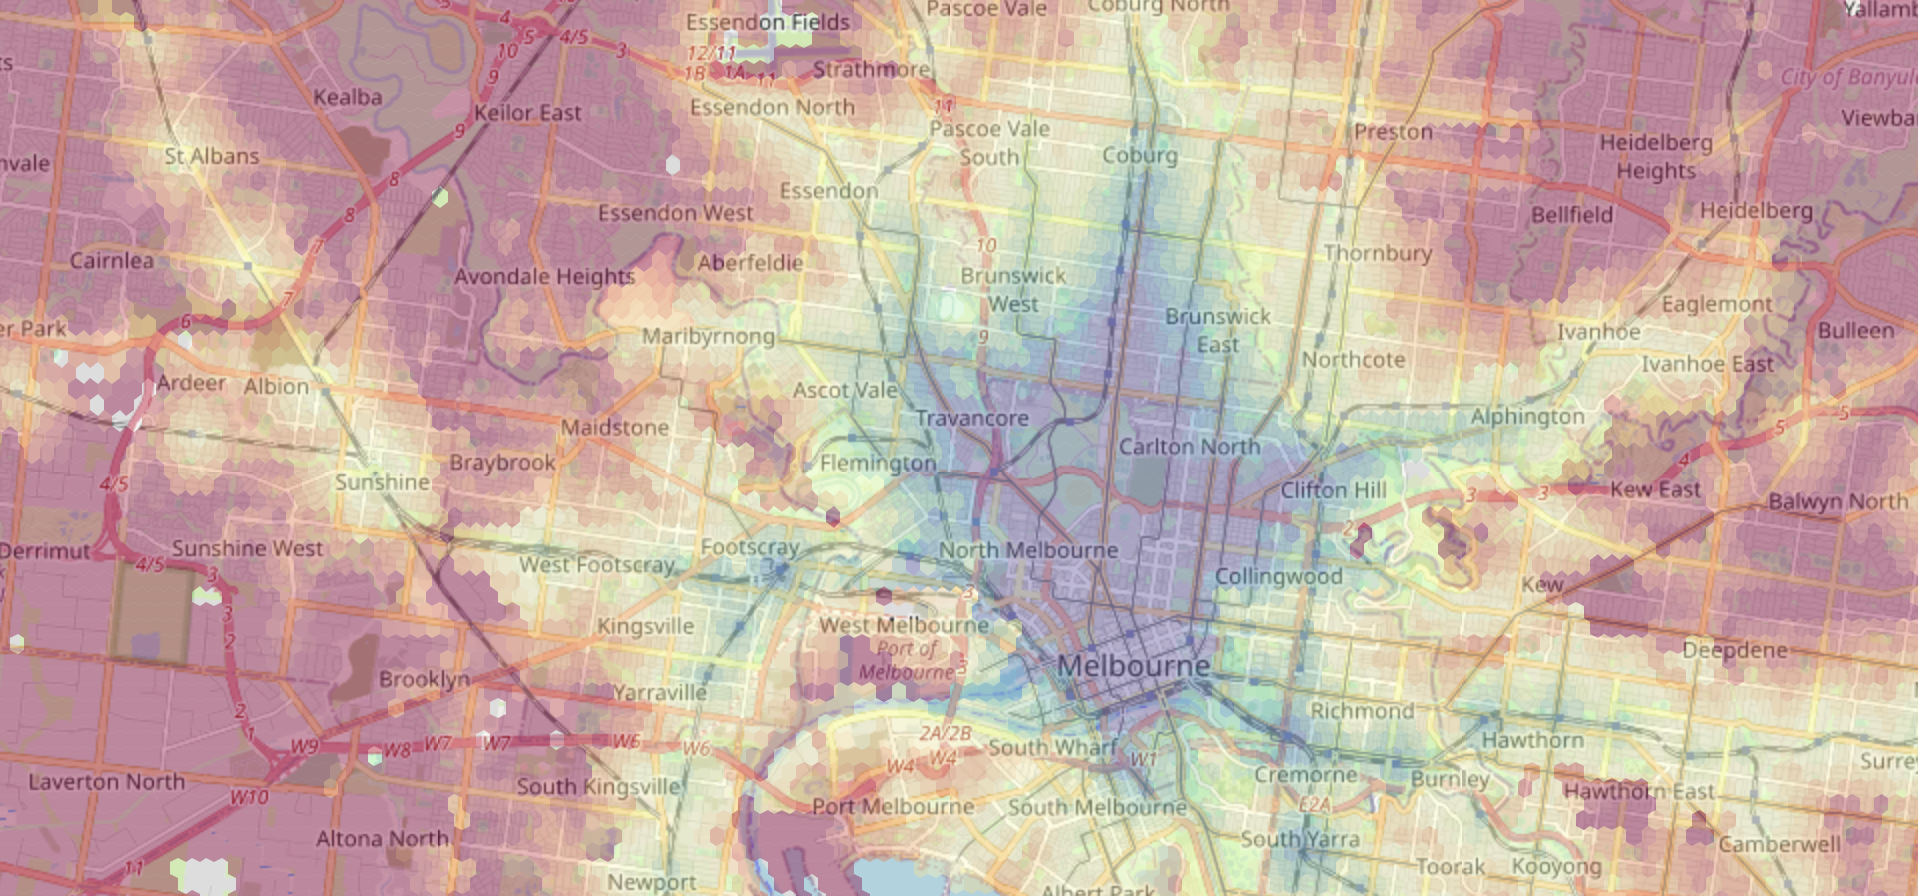 Plotting commute times with R and Google Maps